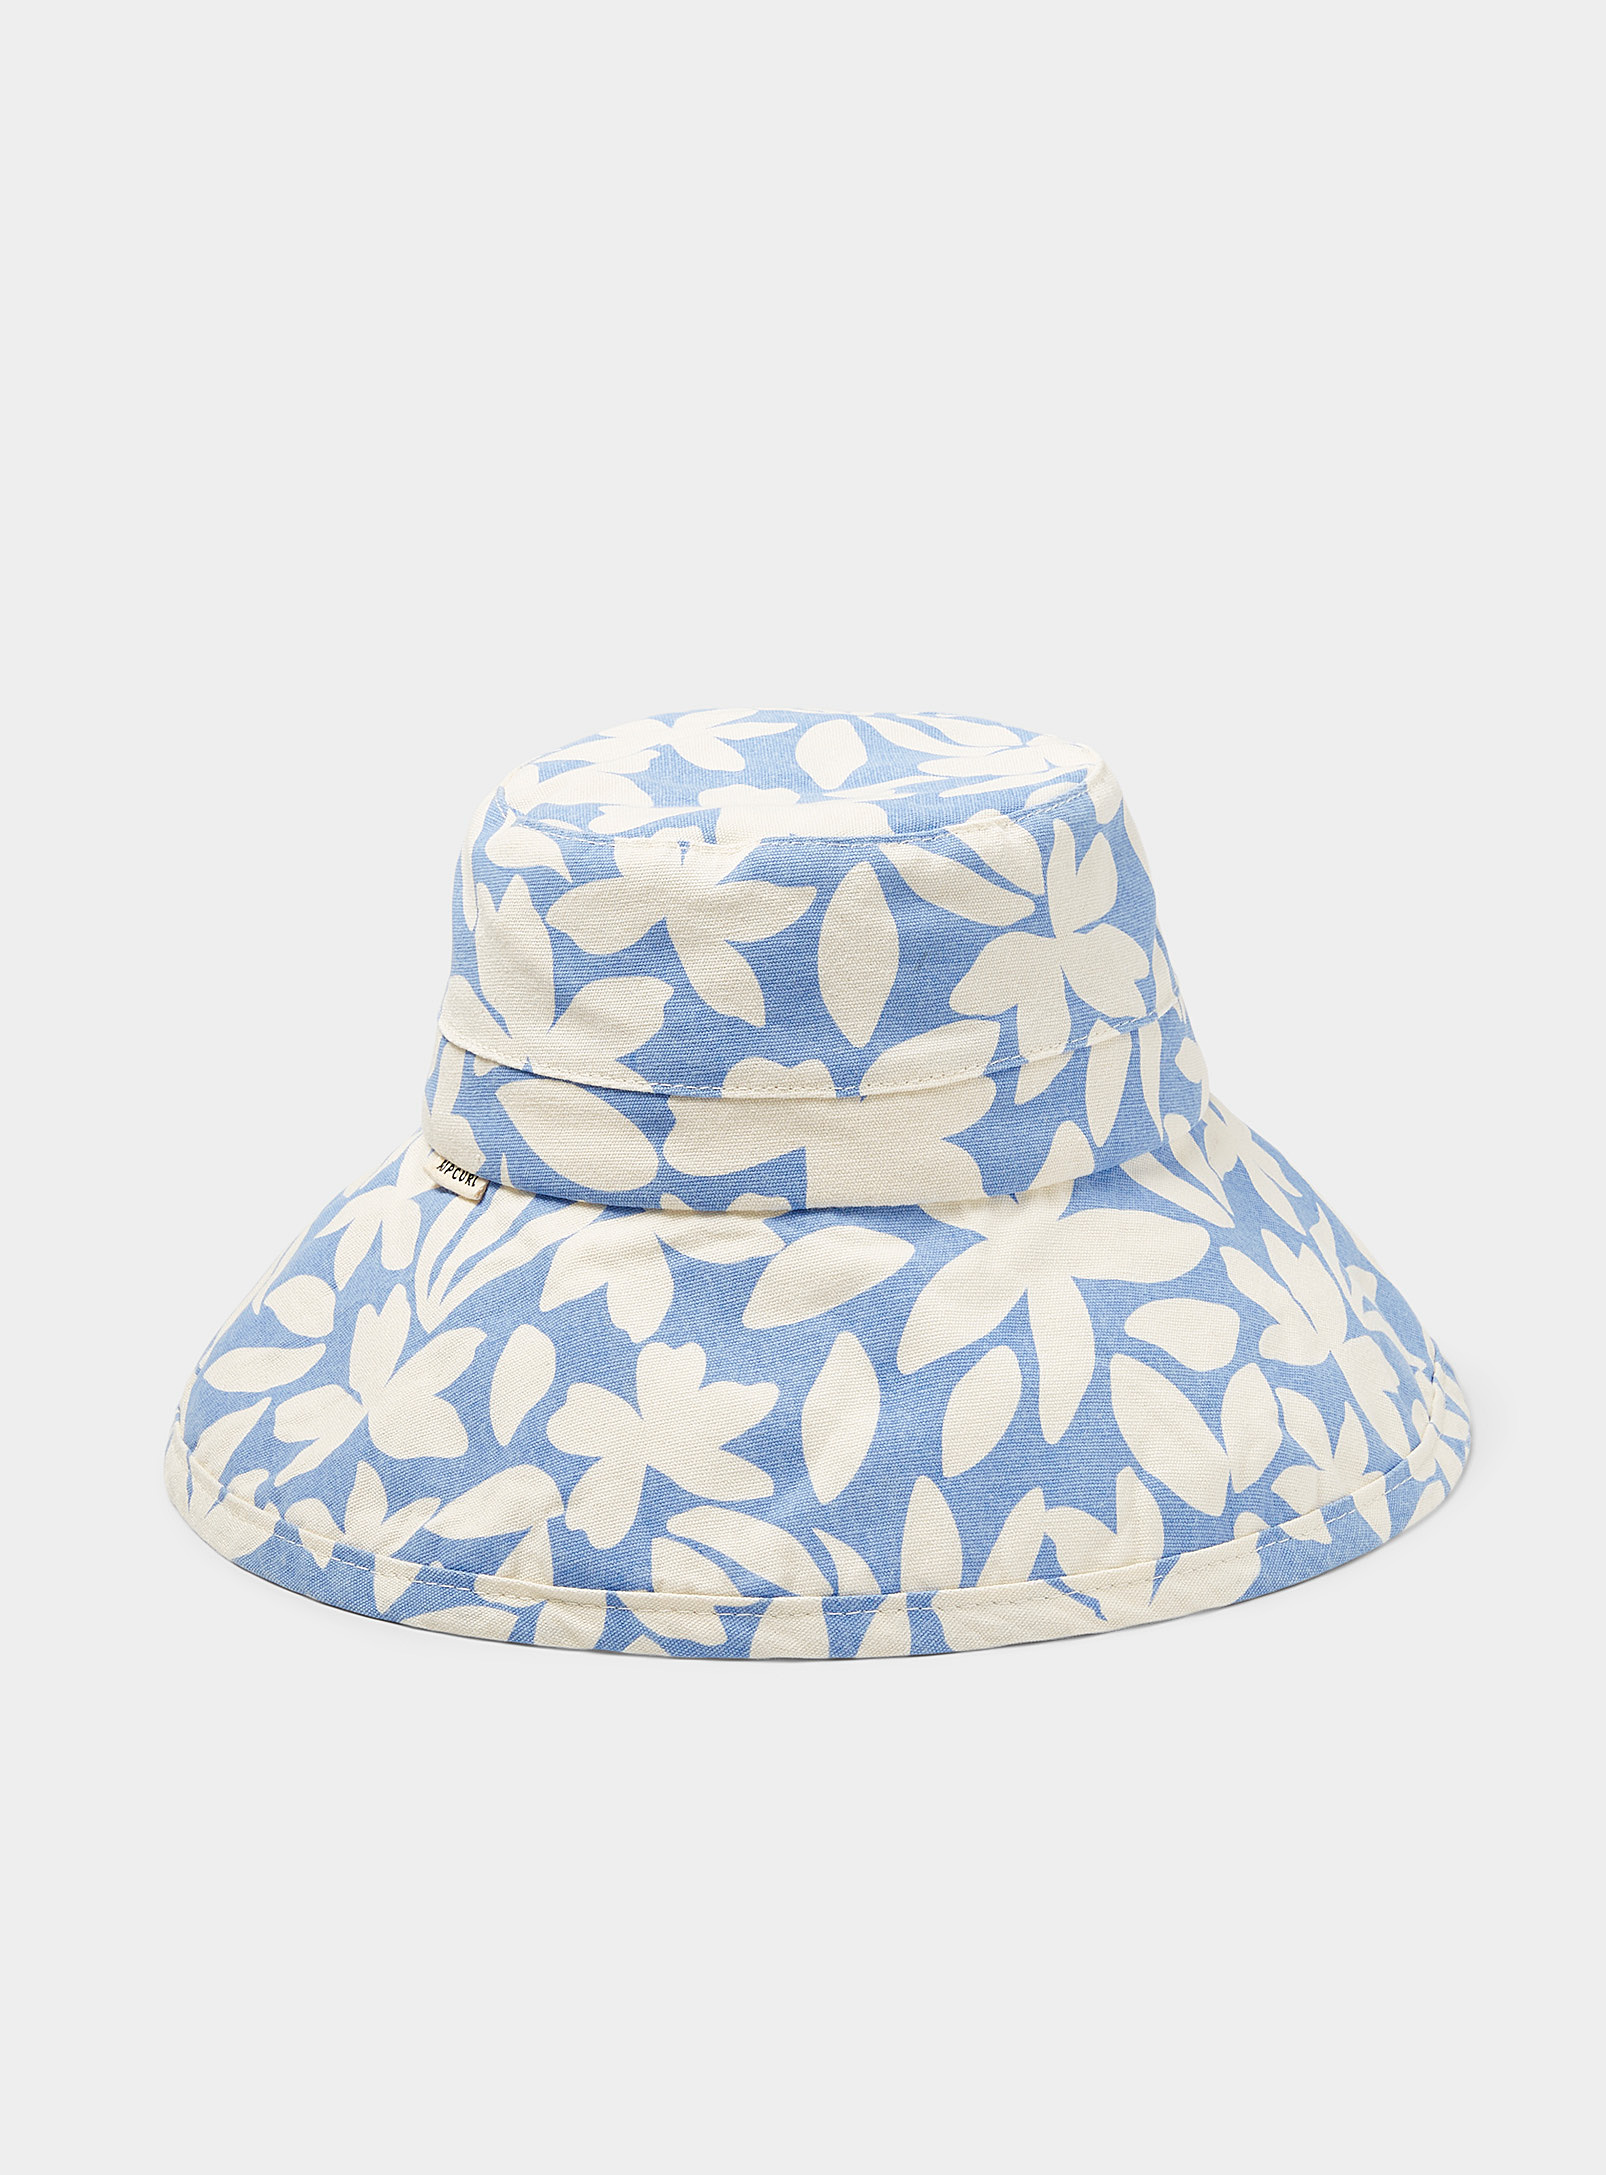 Rip Curl Large Pastel Jacquard Bucket Hat In Patterned Blue